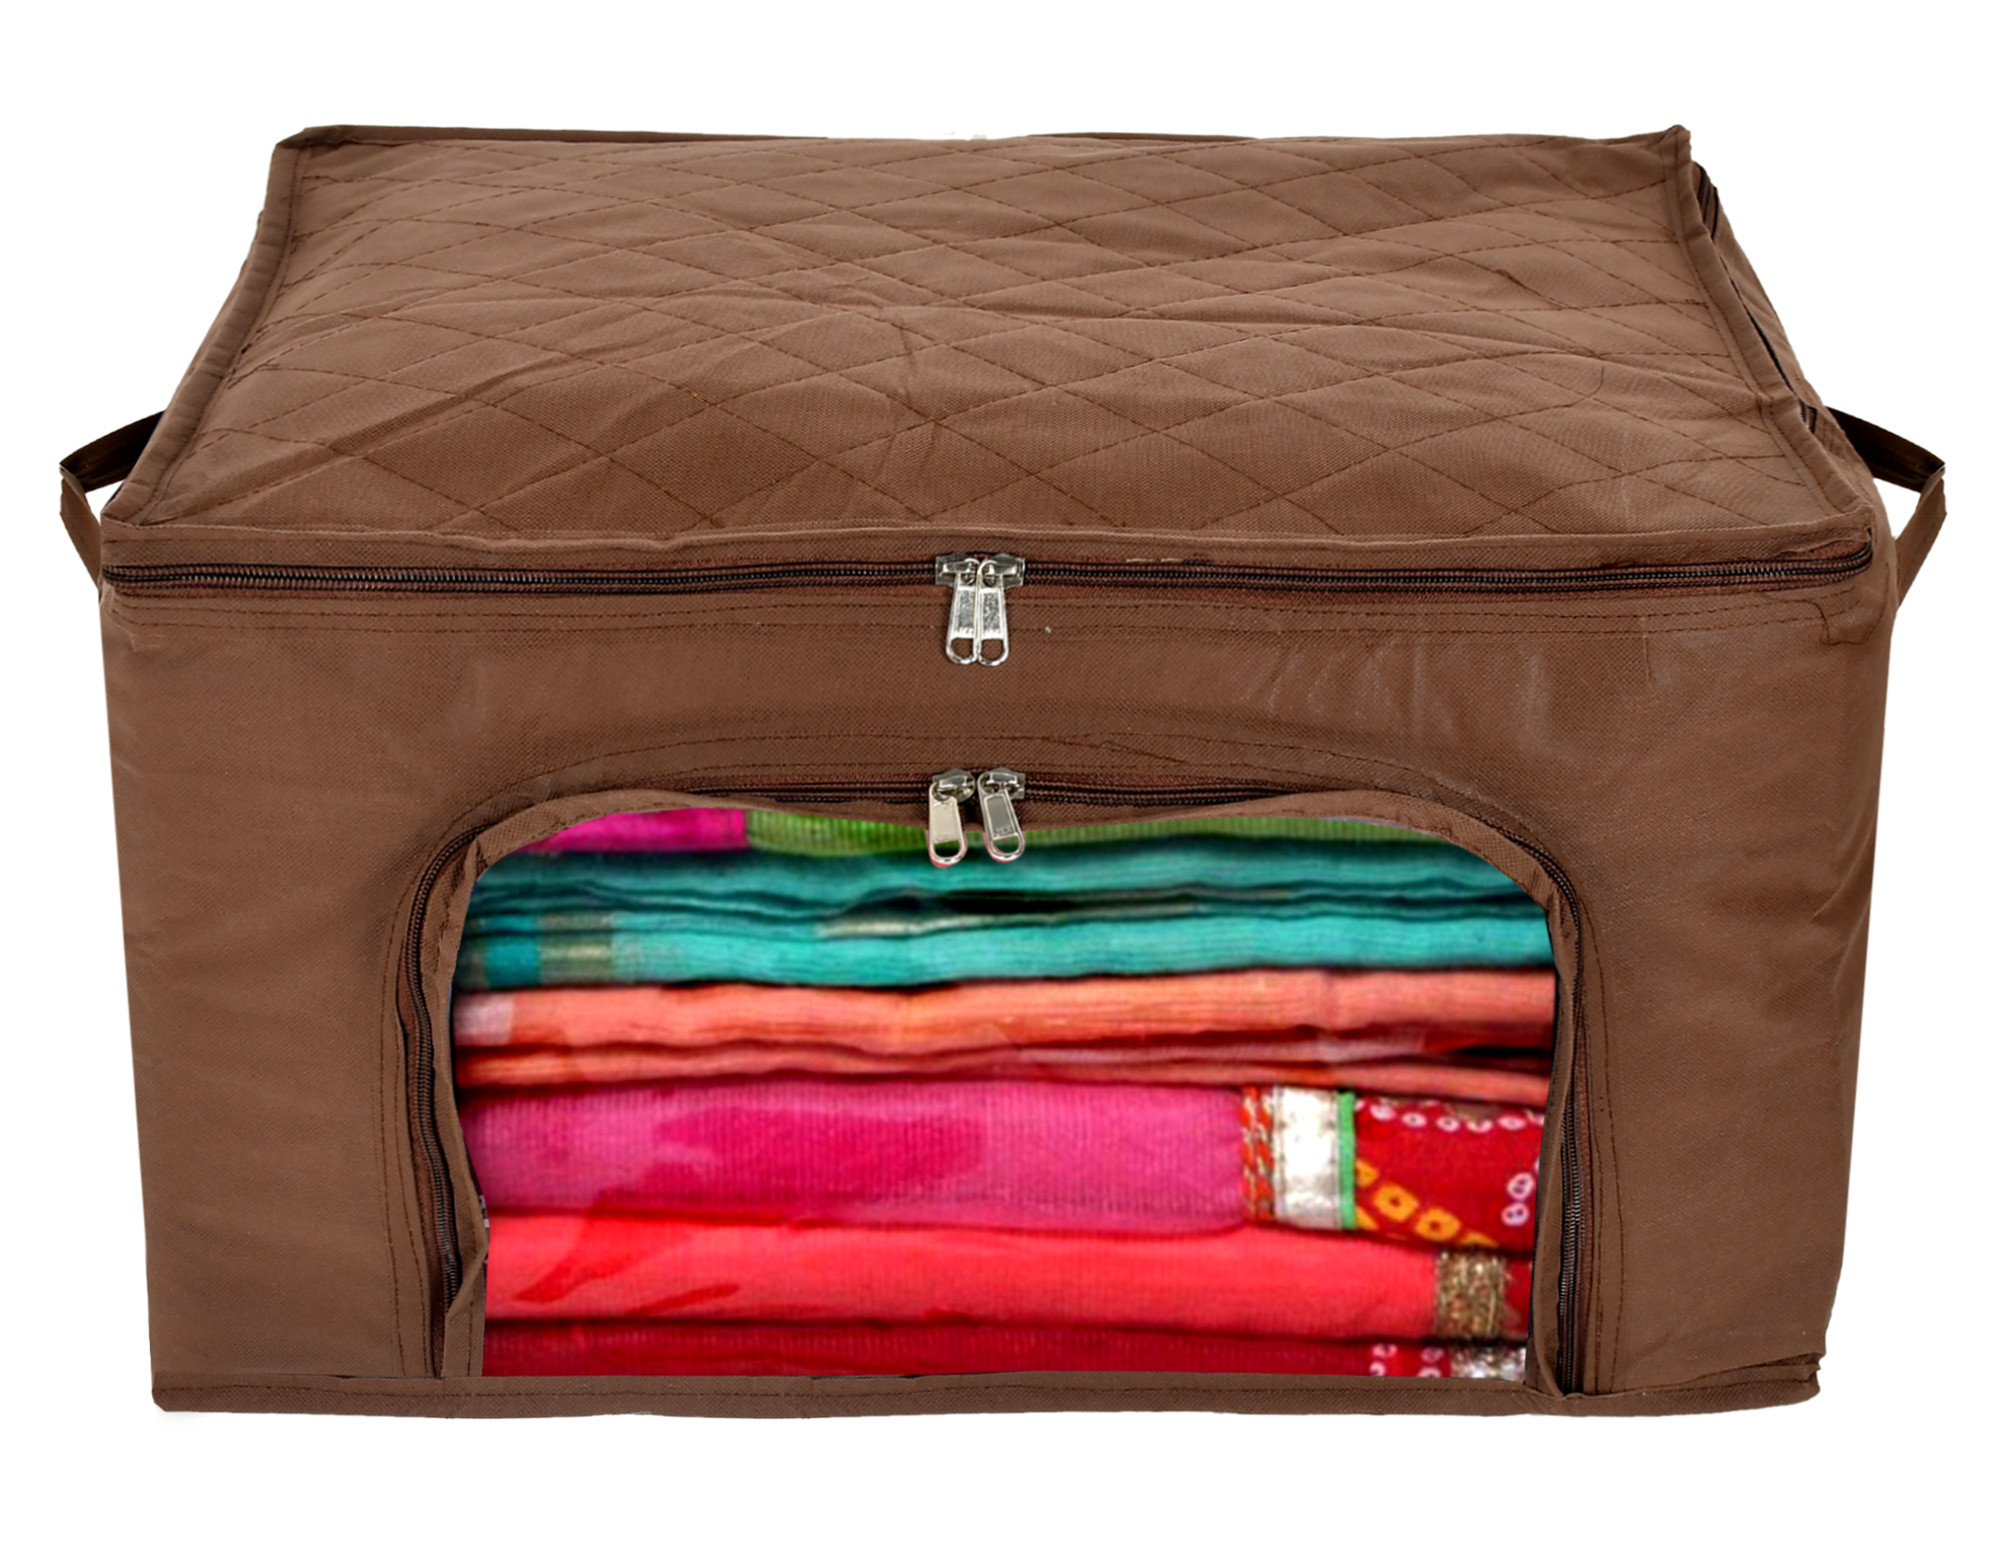 Kuber Industries Clothing Storage Bags, Under Bed Foldable Organizer, Store Blankets, Clothes With Zipper Tranasparent Window, 66 Litre (Brown)-HS_38_KUBMART21297